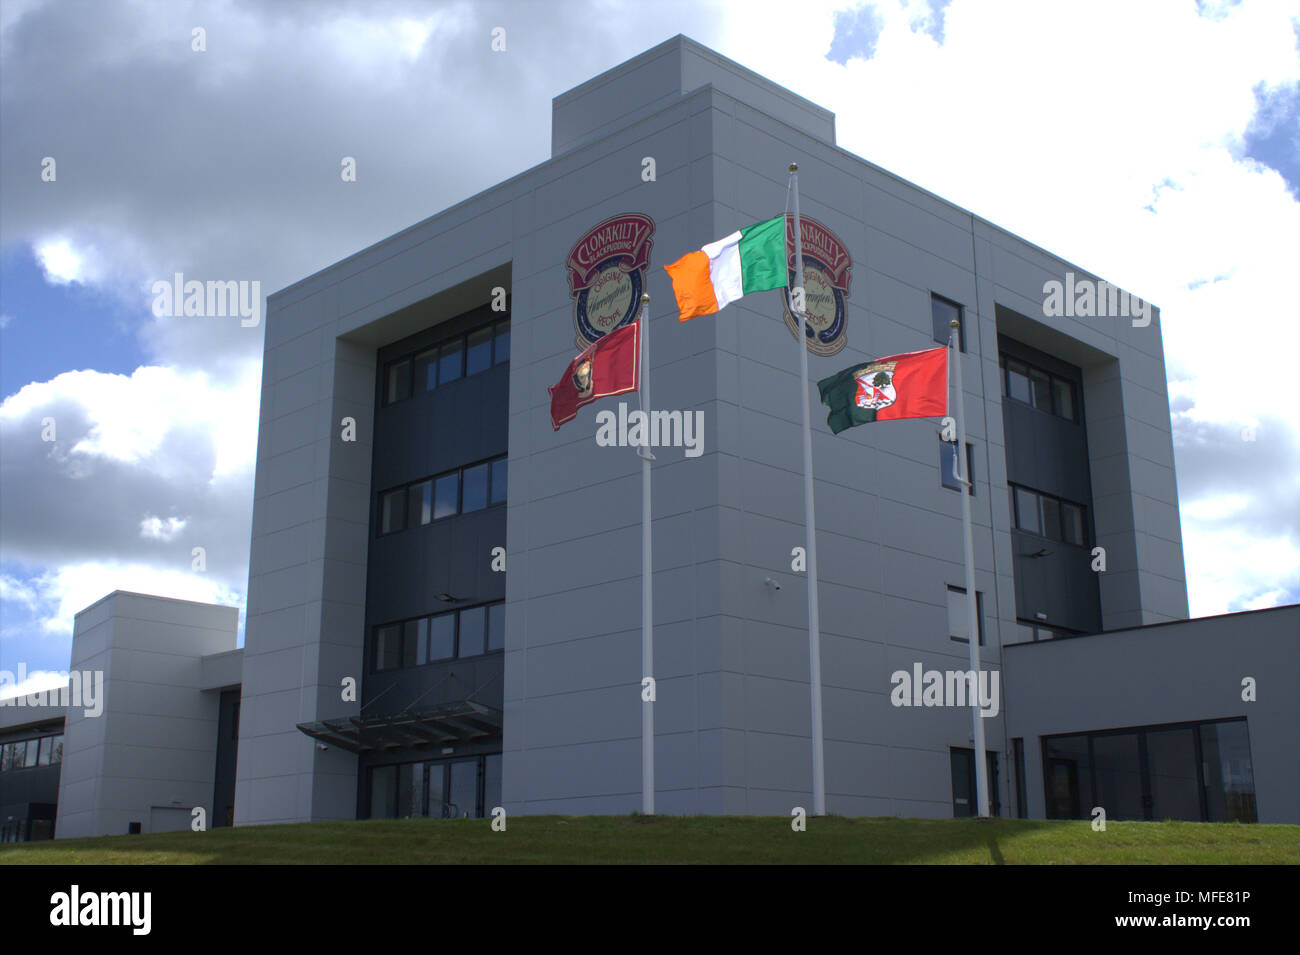 New headquarters building and food production facility for the iconic clonakilty black pudding brand, the most famous black pudding name in ireland. Stock Photo